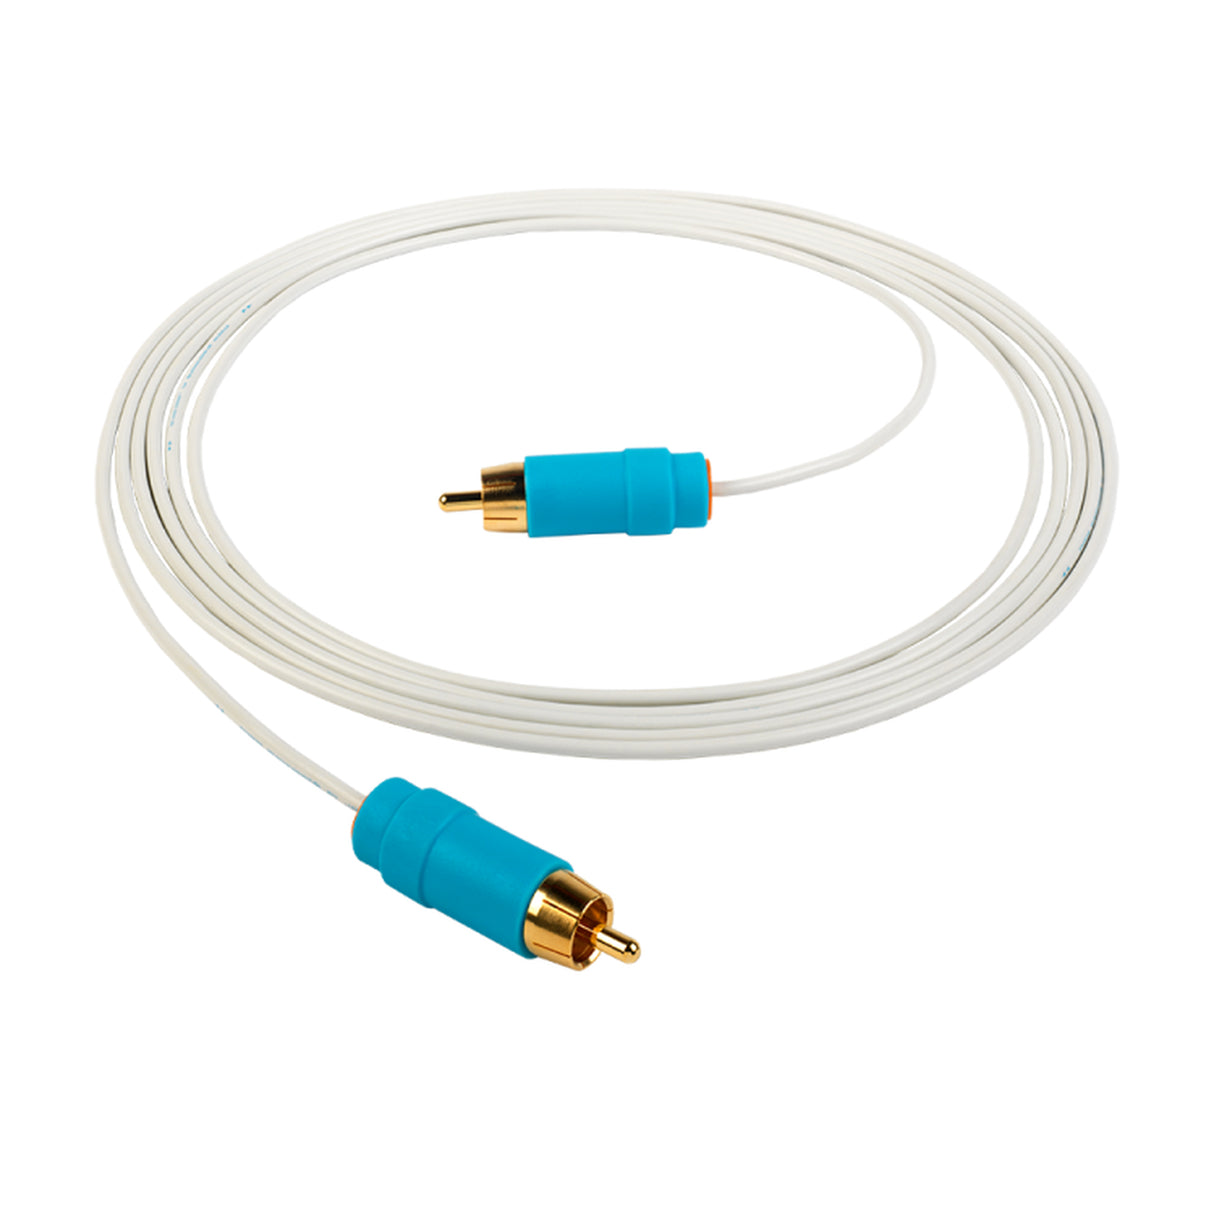 Chord C-line Analogue RCA/Subwoofer Cable (12 Meters)